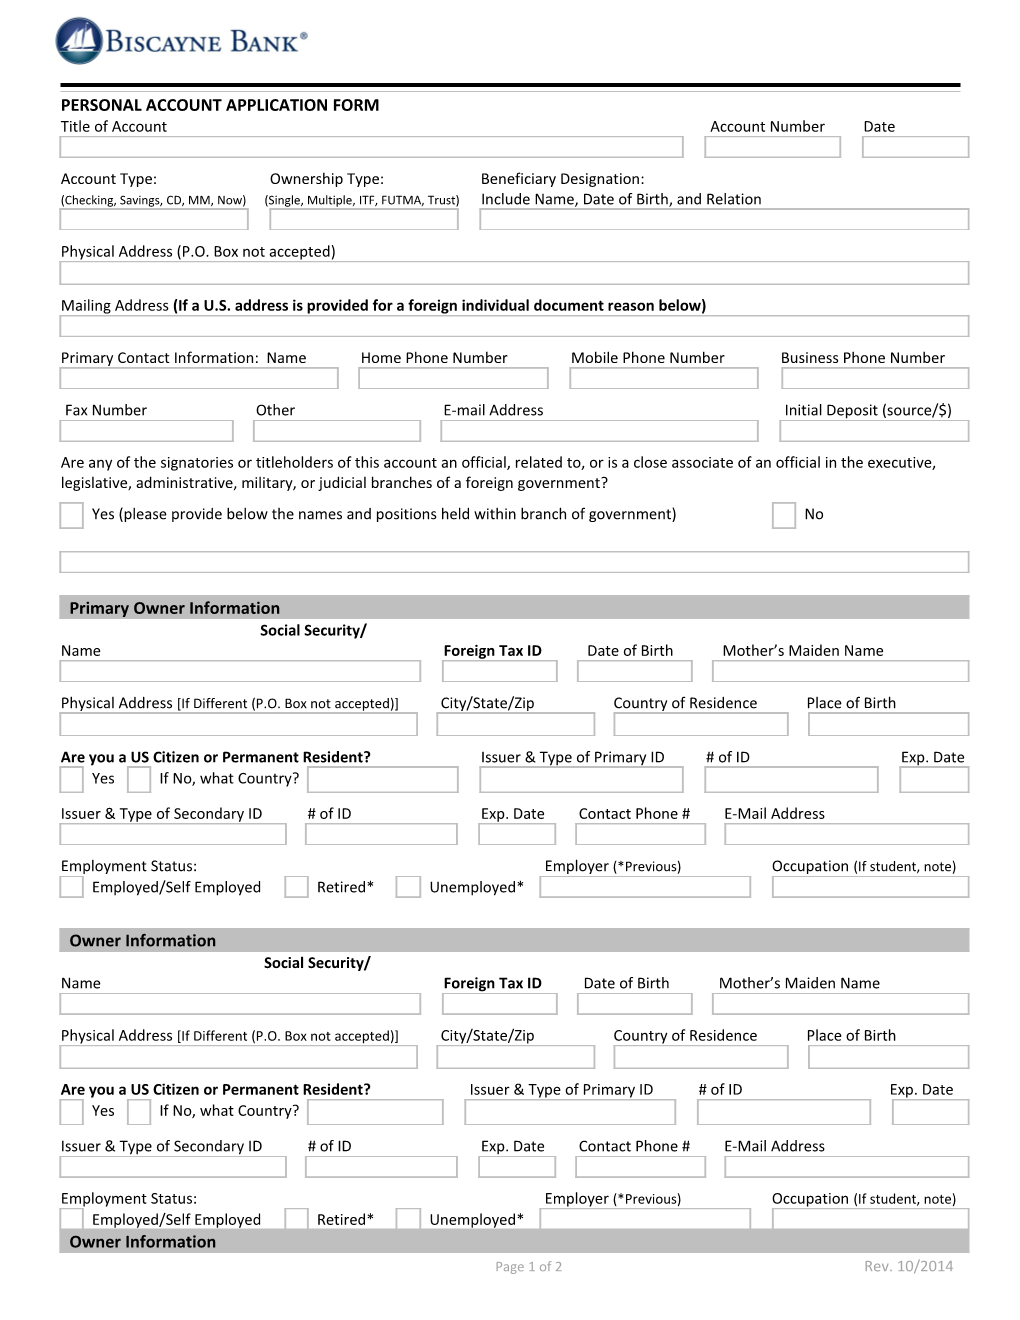 Personal Account Application Form